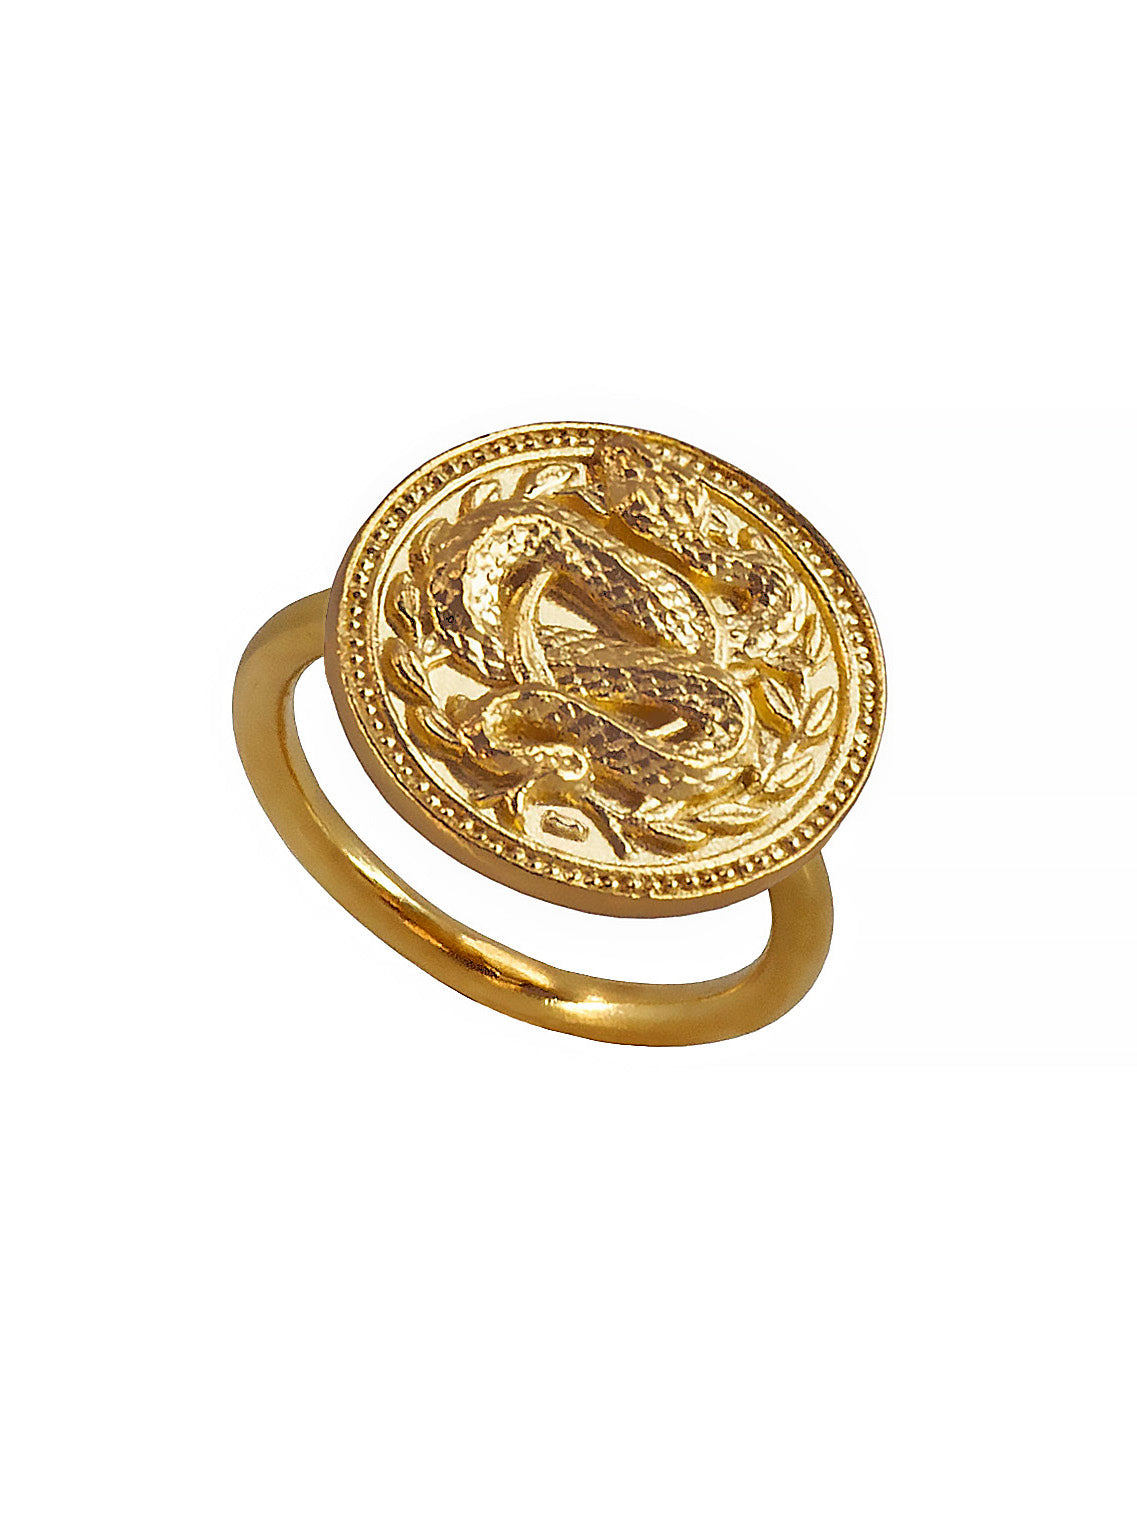 Blood type O Negative Ring. 23ct Gold plated Sterling Silver.Grupo sanguineo Anillo, Dorado